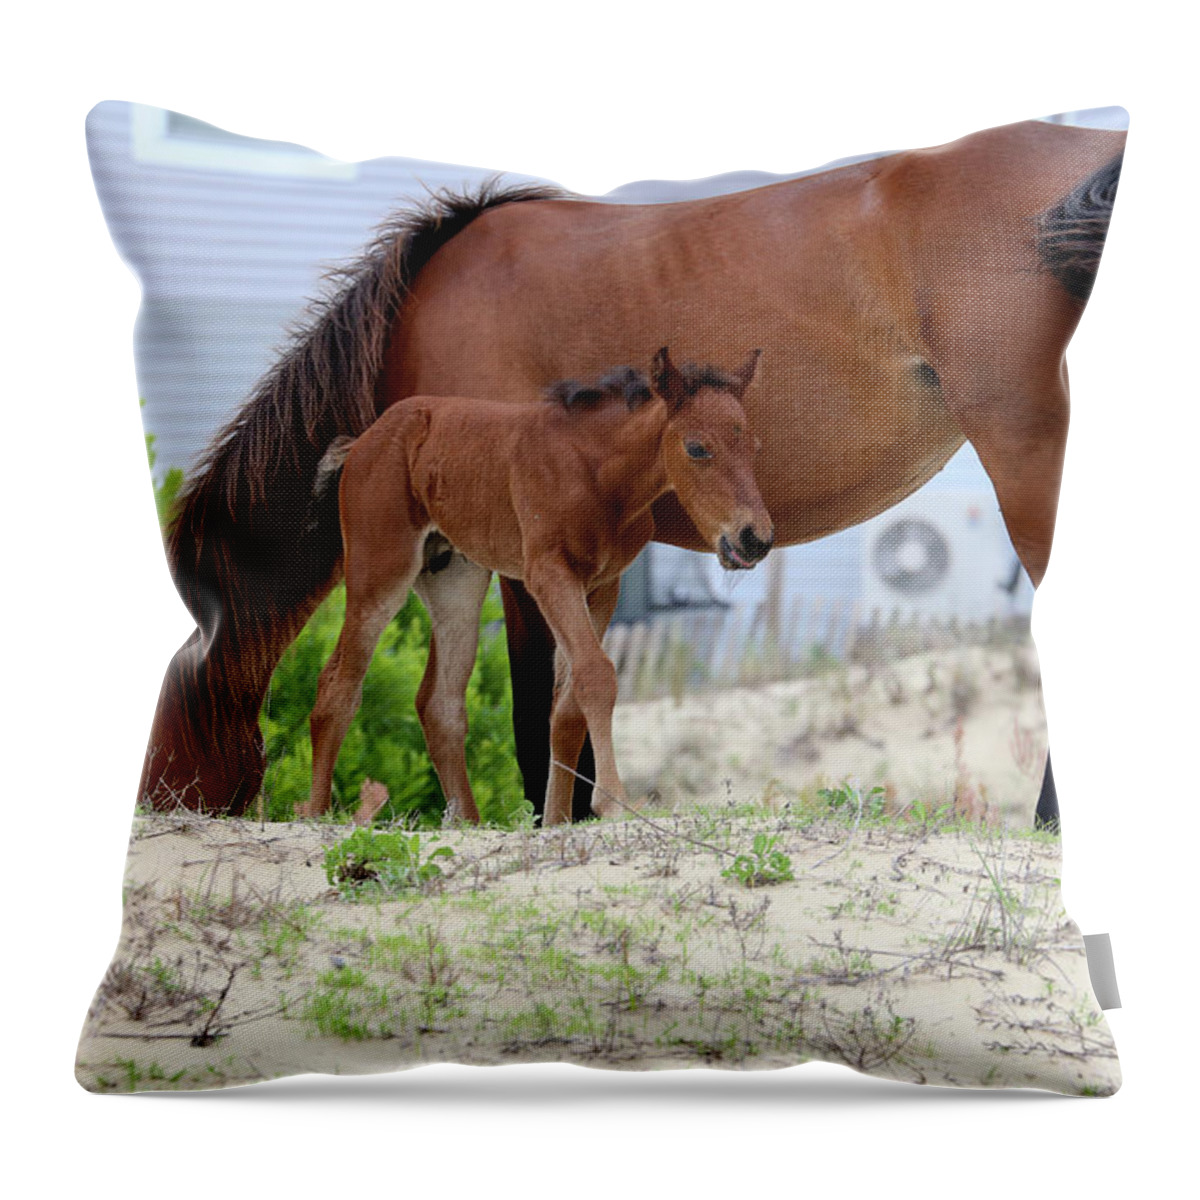 Wild Horses Throw Pillow featuring the photograph Baby Horse by David Stasiak